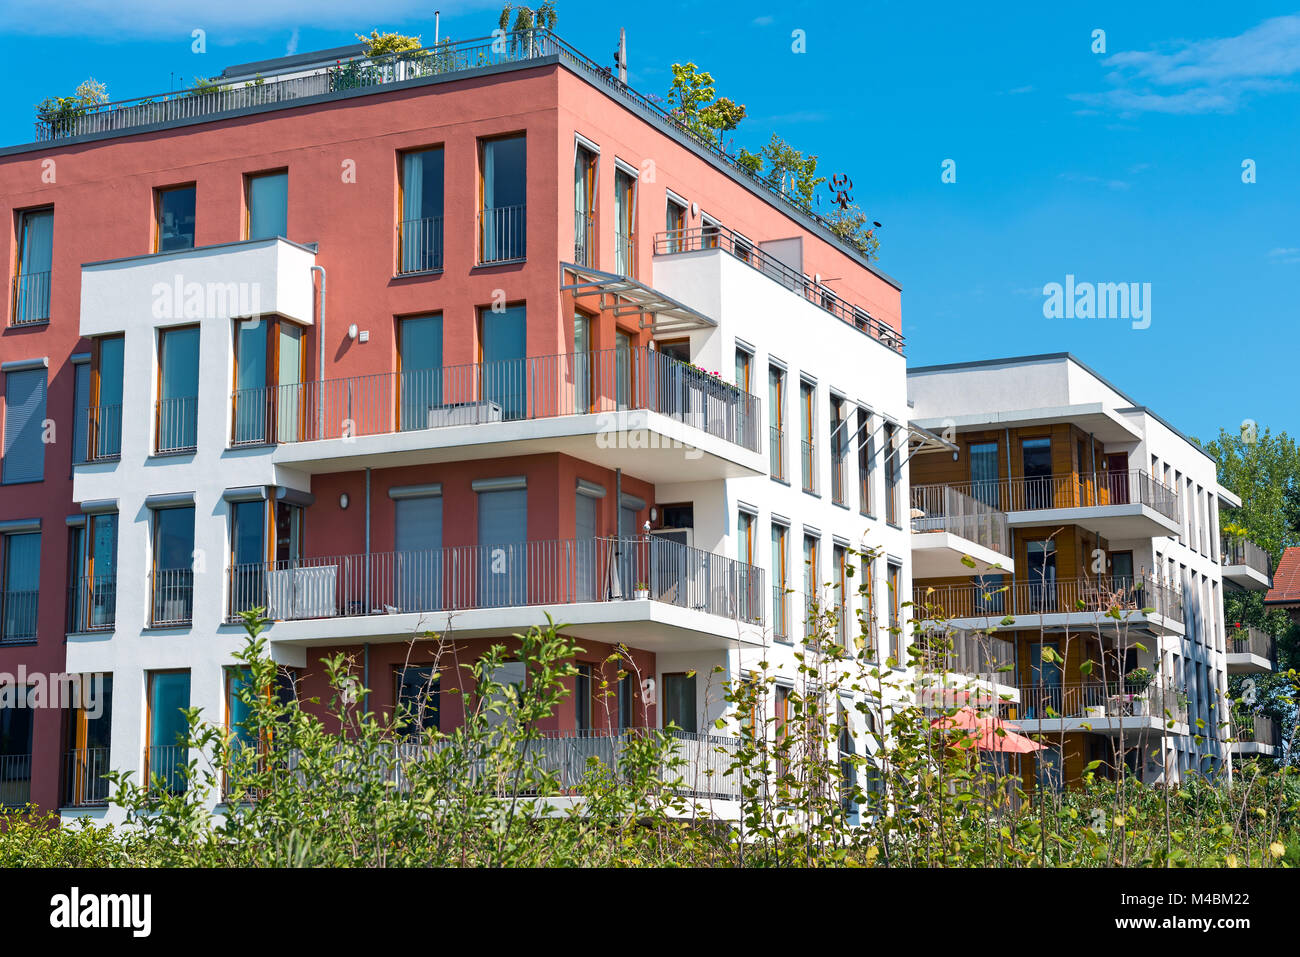 New townhouses seen in Berlin, Germany Stock Photo